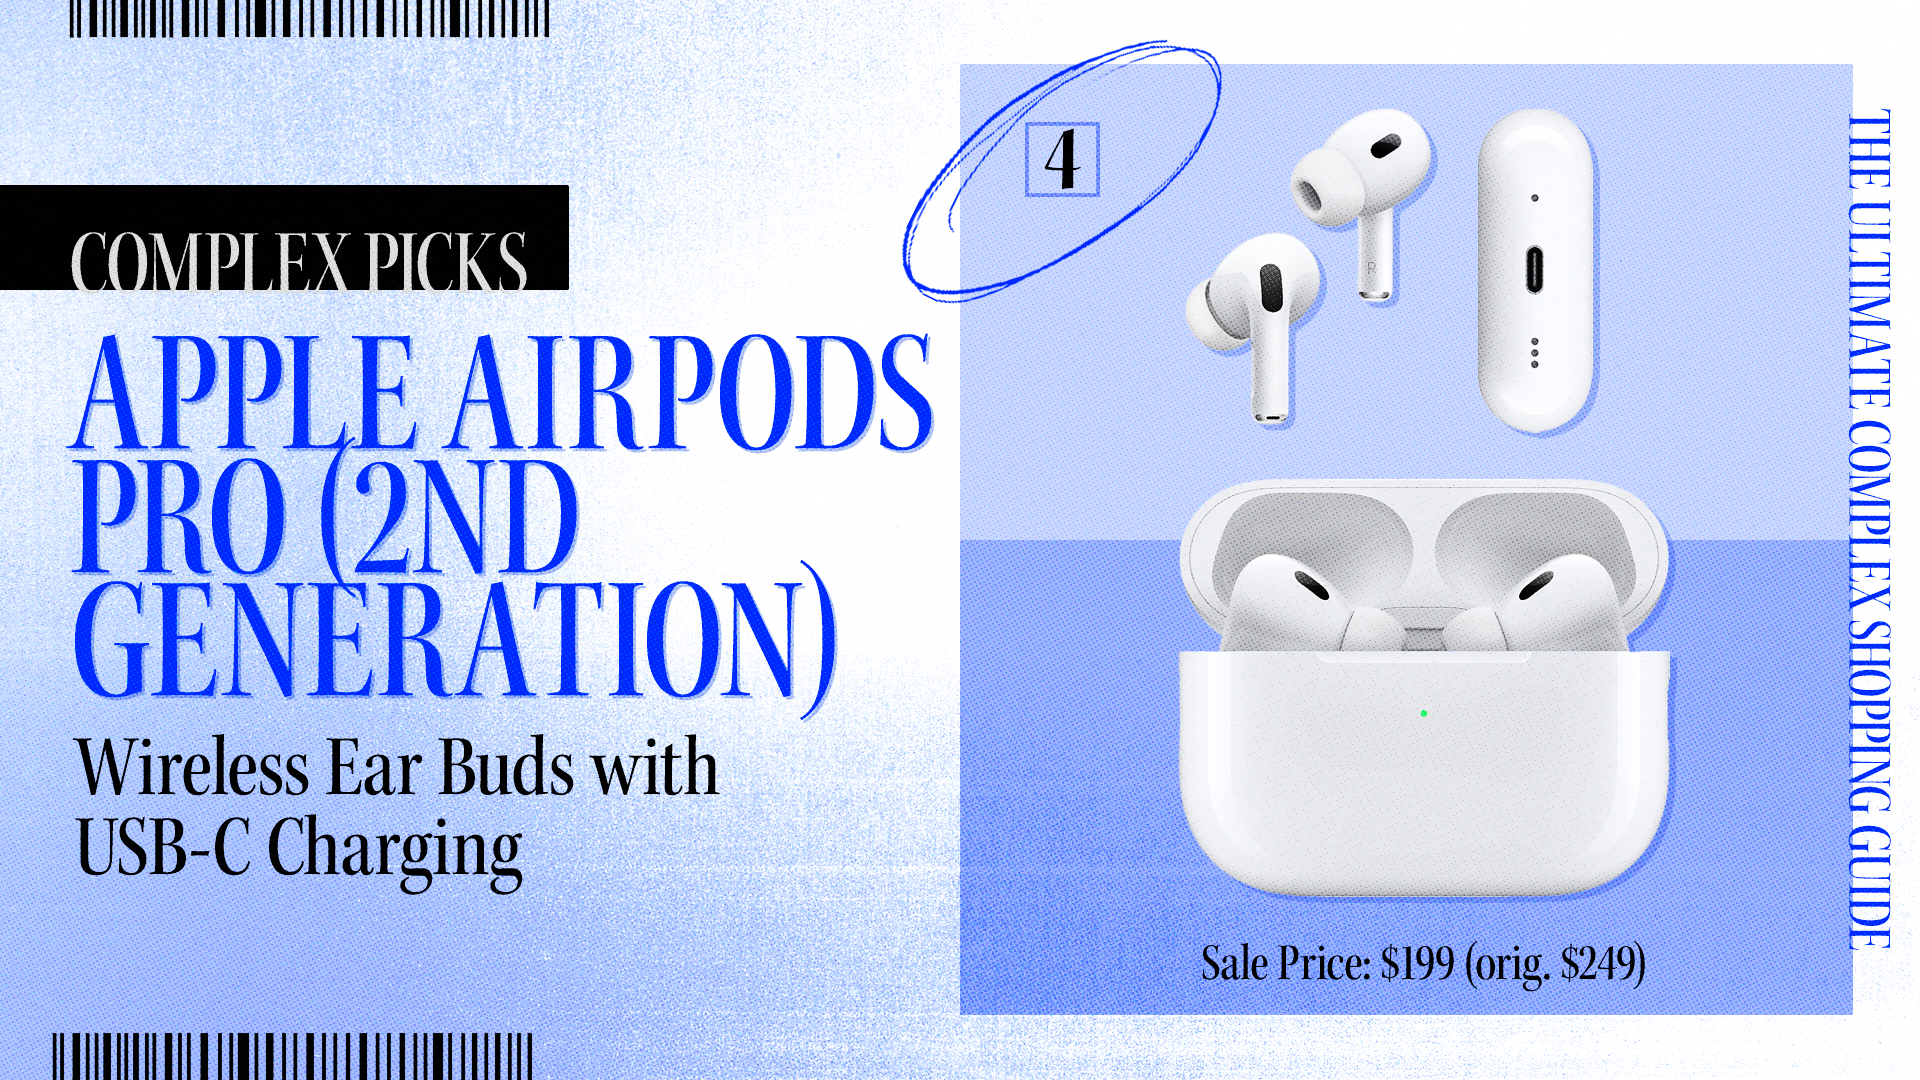 &quot;Complex Picks: Apple AirPods Pro (2nd Generation) with wireless USB-C charging. The Ultimate Complex Shopping Guide. Sale price: $199 (originally $249).&quot;